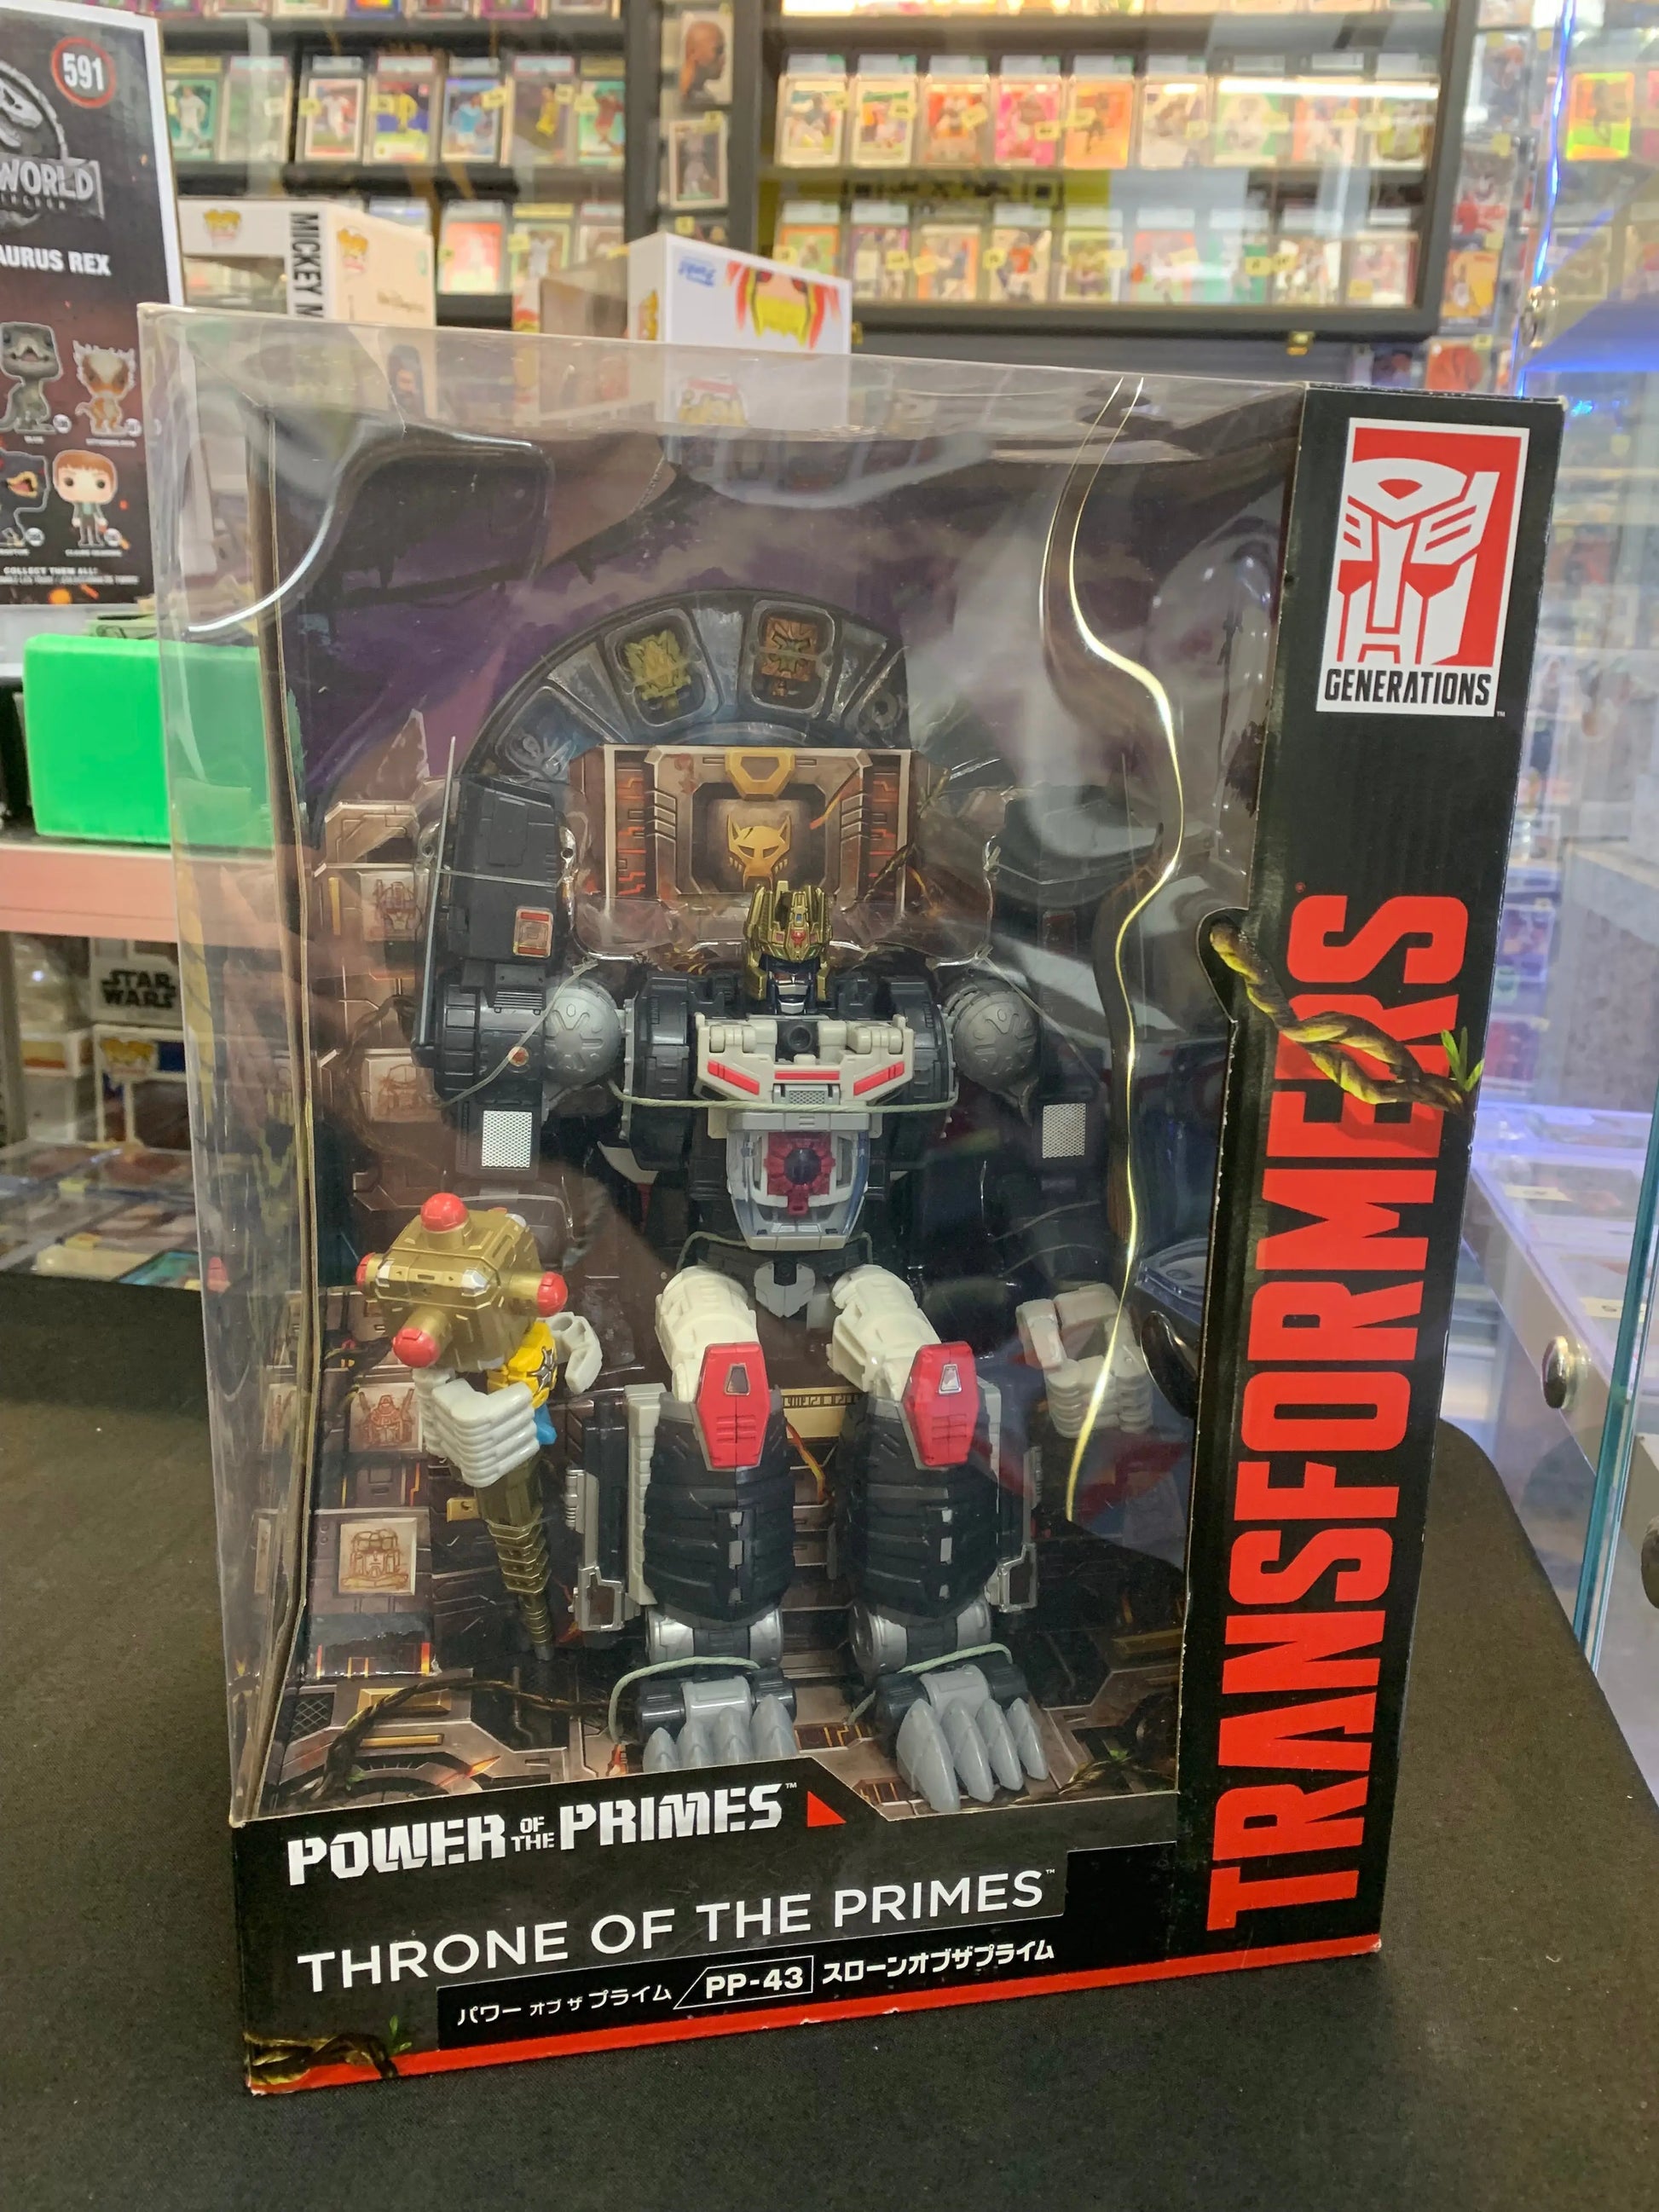 Transformers PP-43 Power of the Primes Throne of the Primes Optimus Primal Tomy FRENLY BRICKS - Open 7 Days